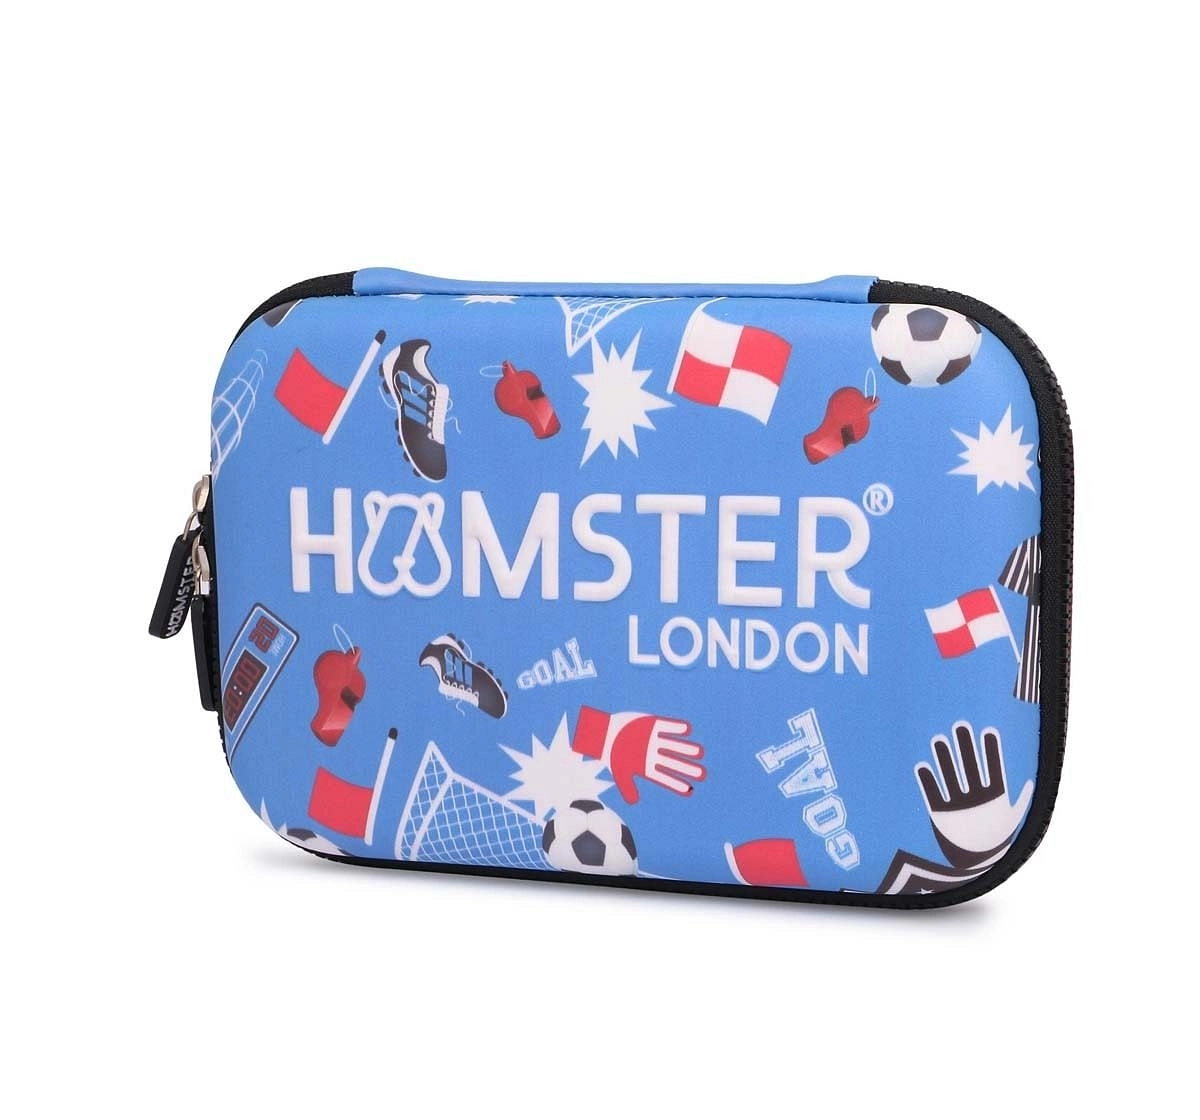 Hamster London Hardcase Football Bags for Kids Age 3Y+ (Blue)